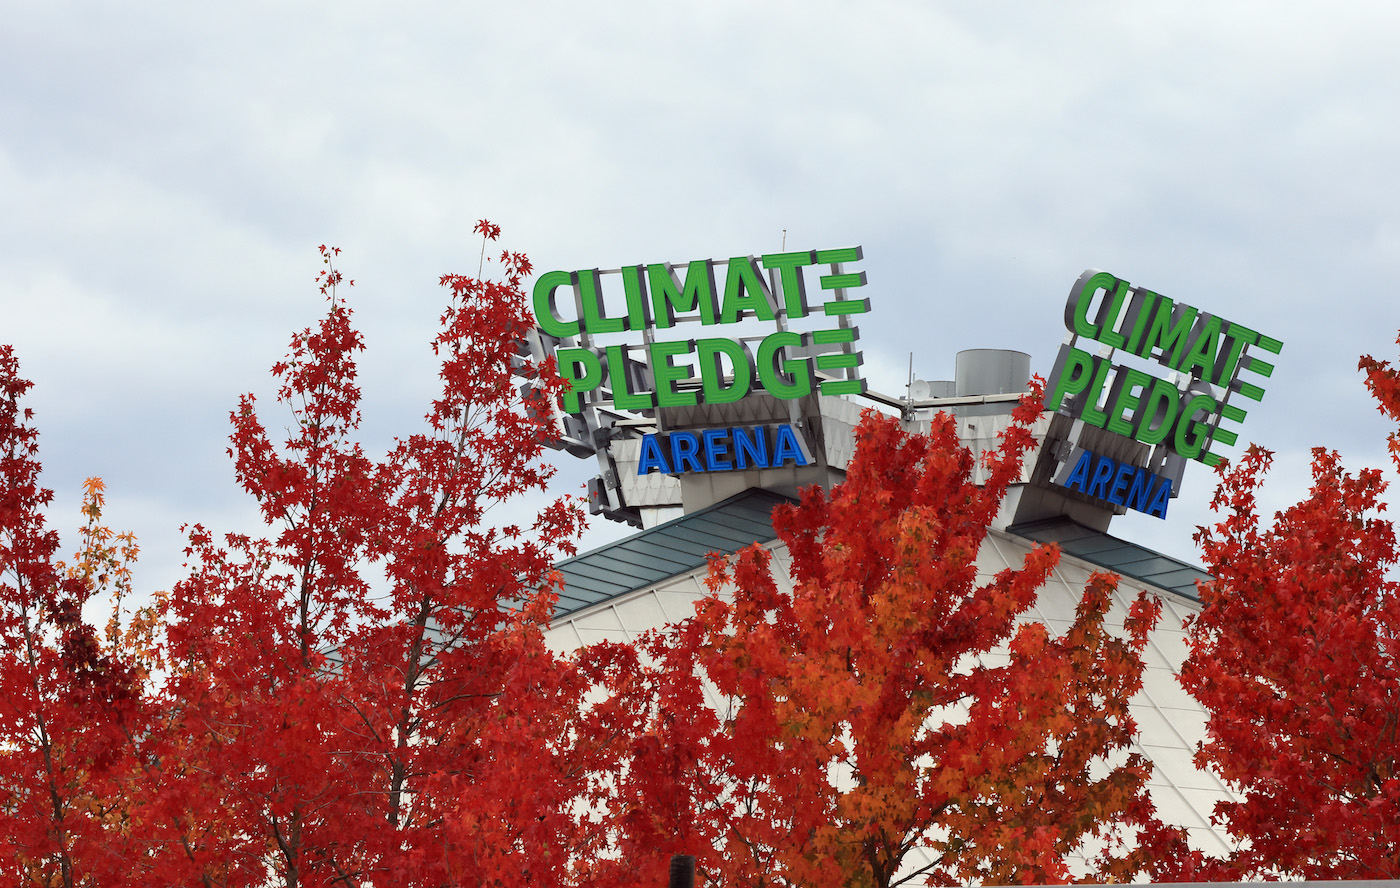 A general view of the Climate Pledge Arena prior to tomorrow's opening night for the NHL's newest hockey franchise on October 22, 2021 in Seattle, Washington. (